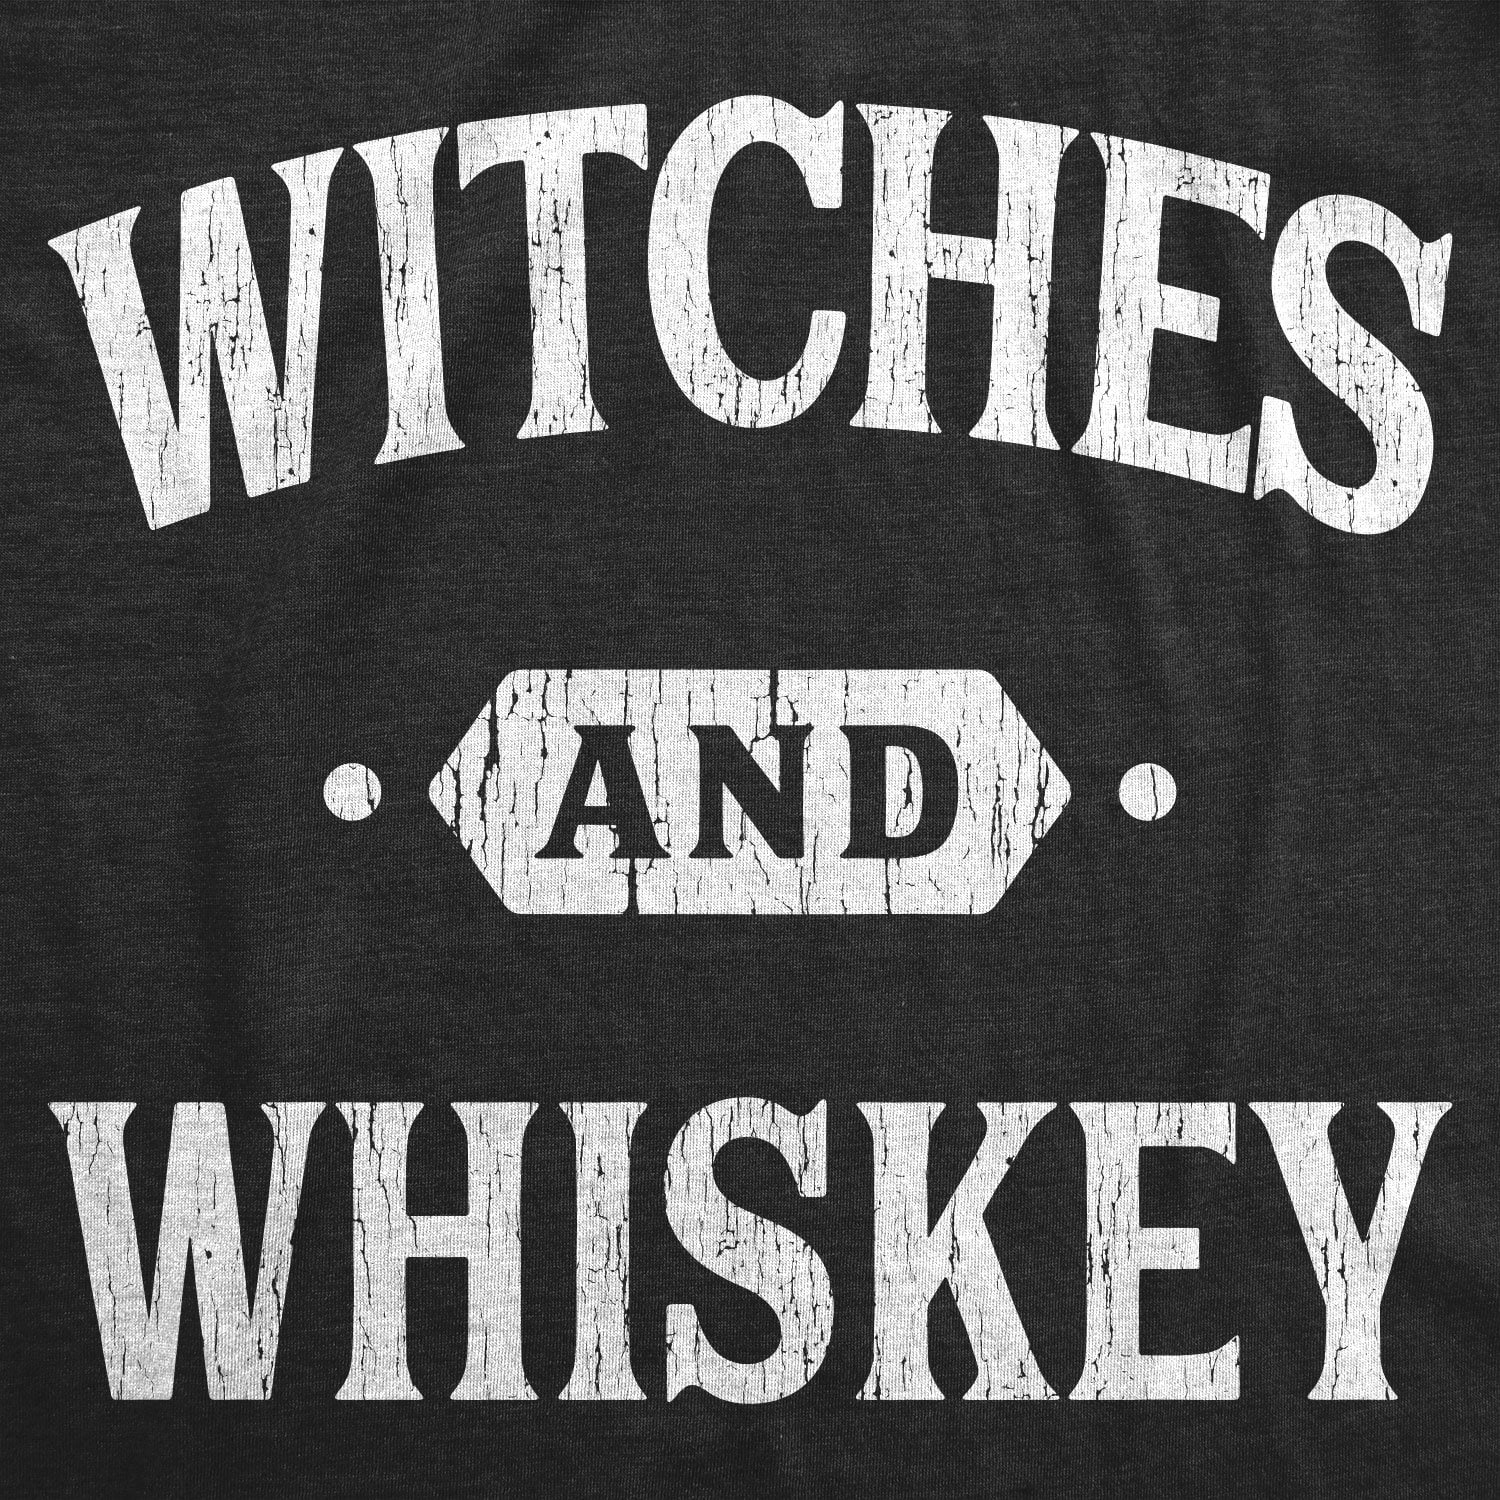 Discover Witches and Whiskey Shirt, Witch Shirt, Halloween Shirt, Funny Halloween Shirts, Mens Halloween Shirts, Whiskey Shirts, Halloween Drinking